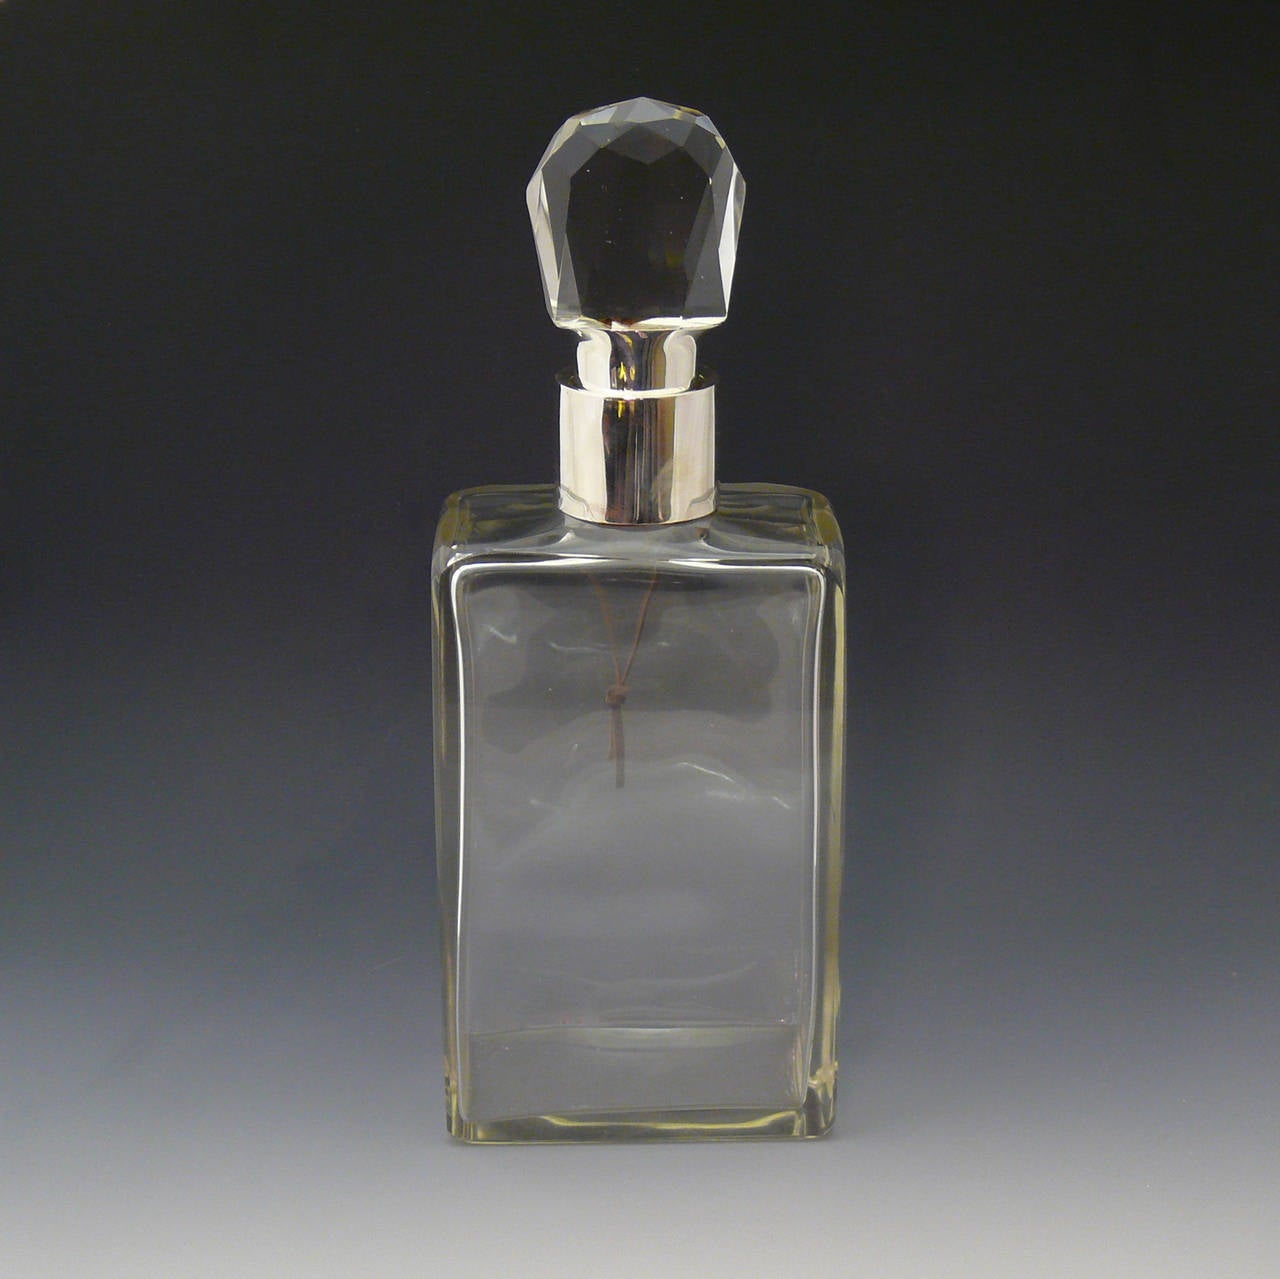 Stylish Locking Decanter with faceted cut glass stopper, silver collar and lock, hallmarked London 1909.

Dimensions: 12 cm/4¾ inches (width) x 7 cm/2¾ inches (depth) x 32 cm/12½ inches (height)

Bentleys are Members of LAPADA, the London and